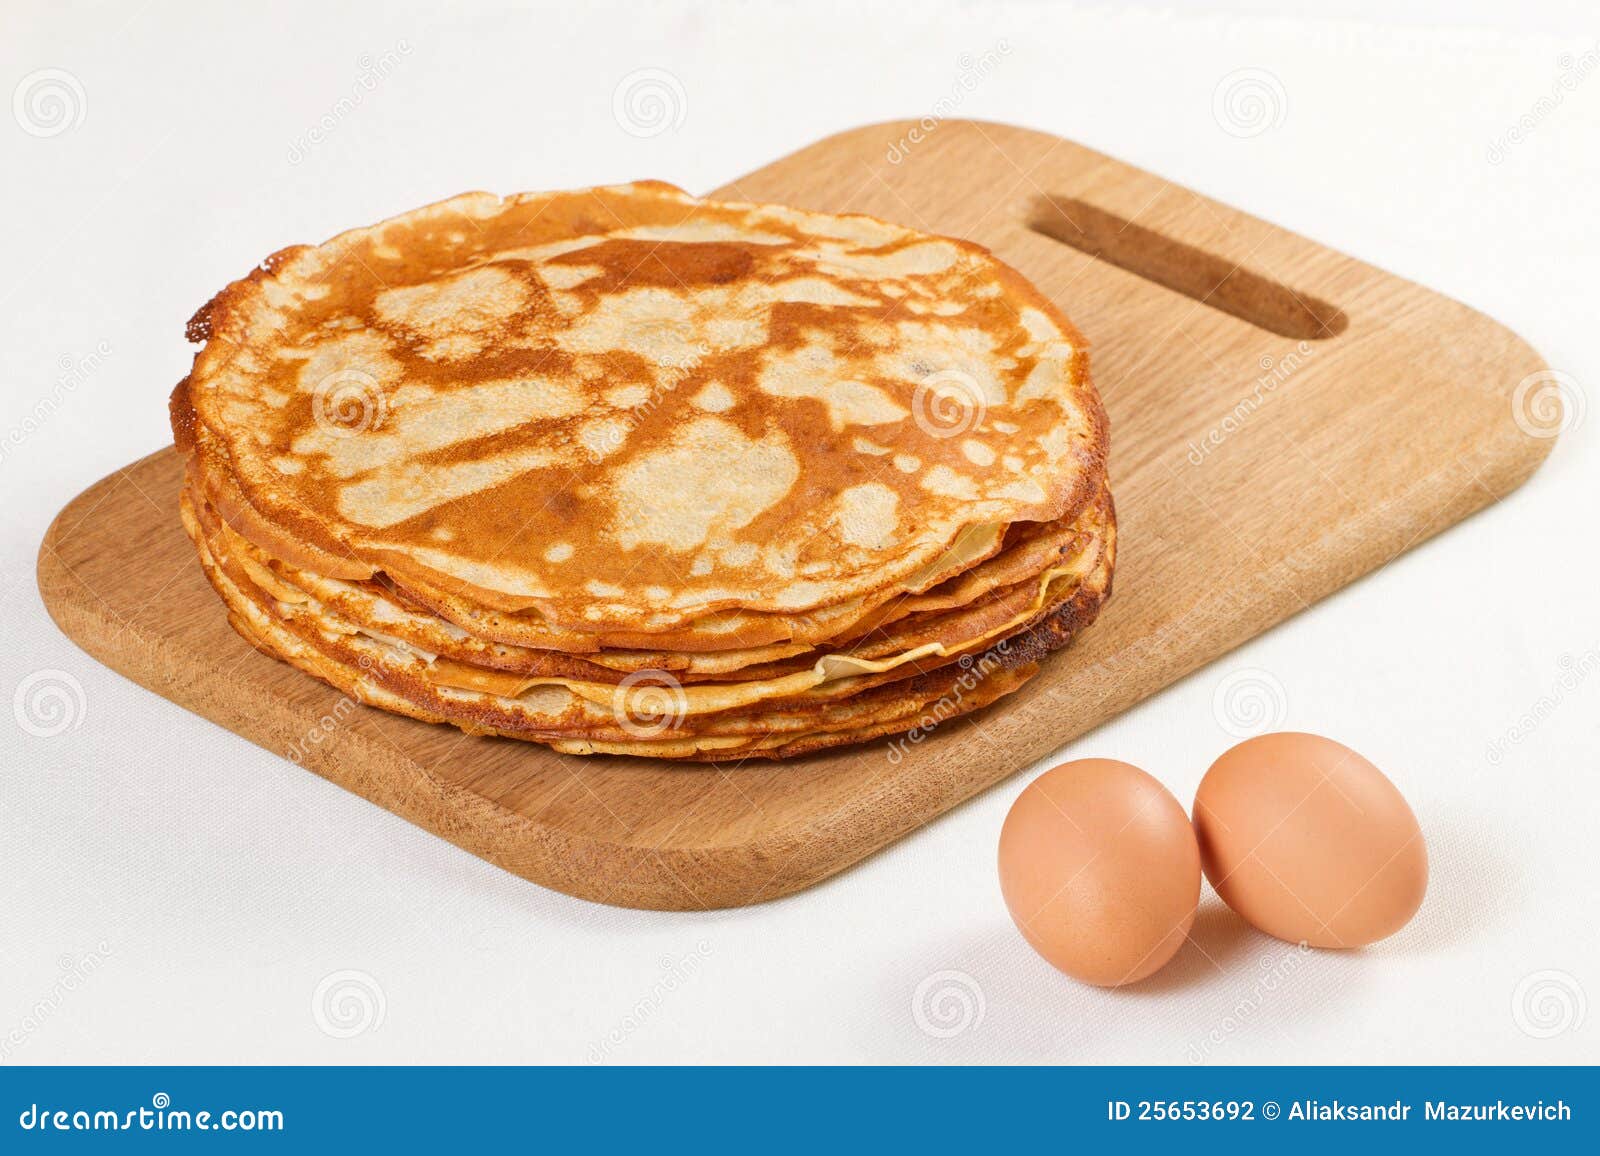 Stock Pancakes with  Flour pancakes Pile flour make And Photography  how to  Some  white With Image  Of Eggs strong